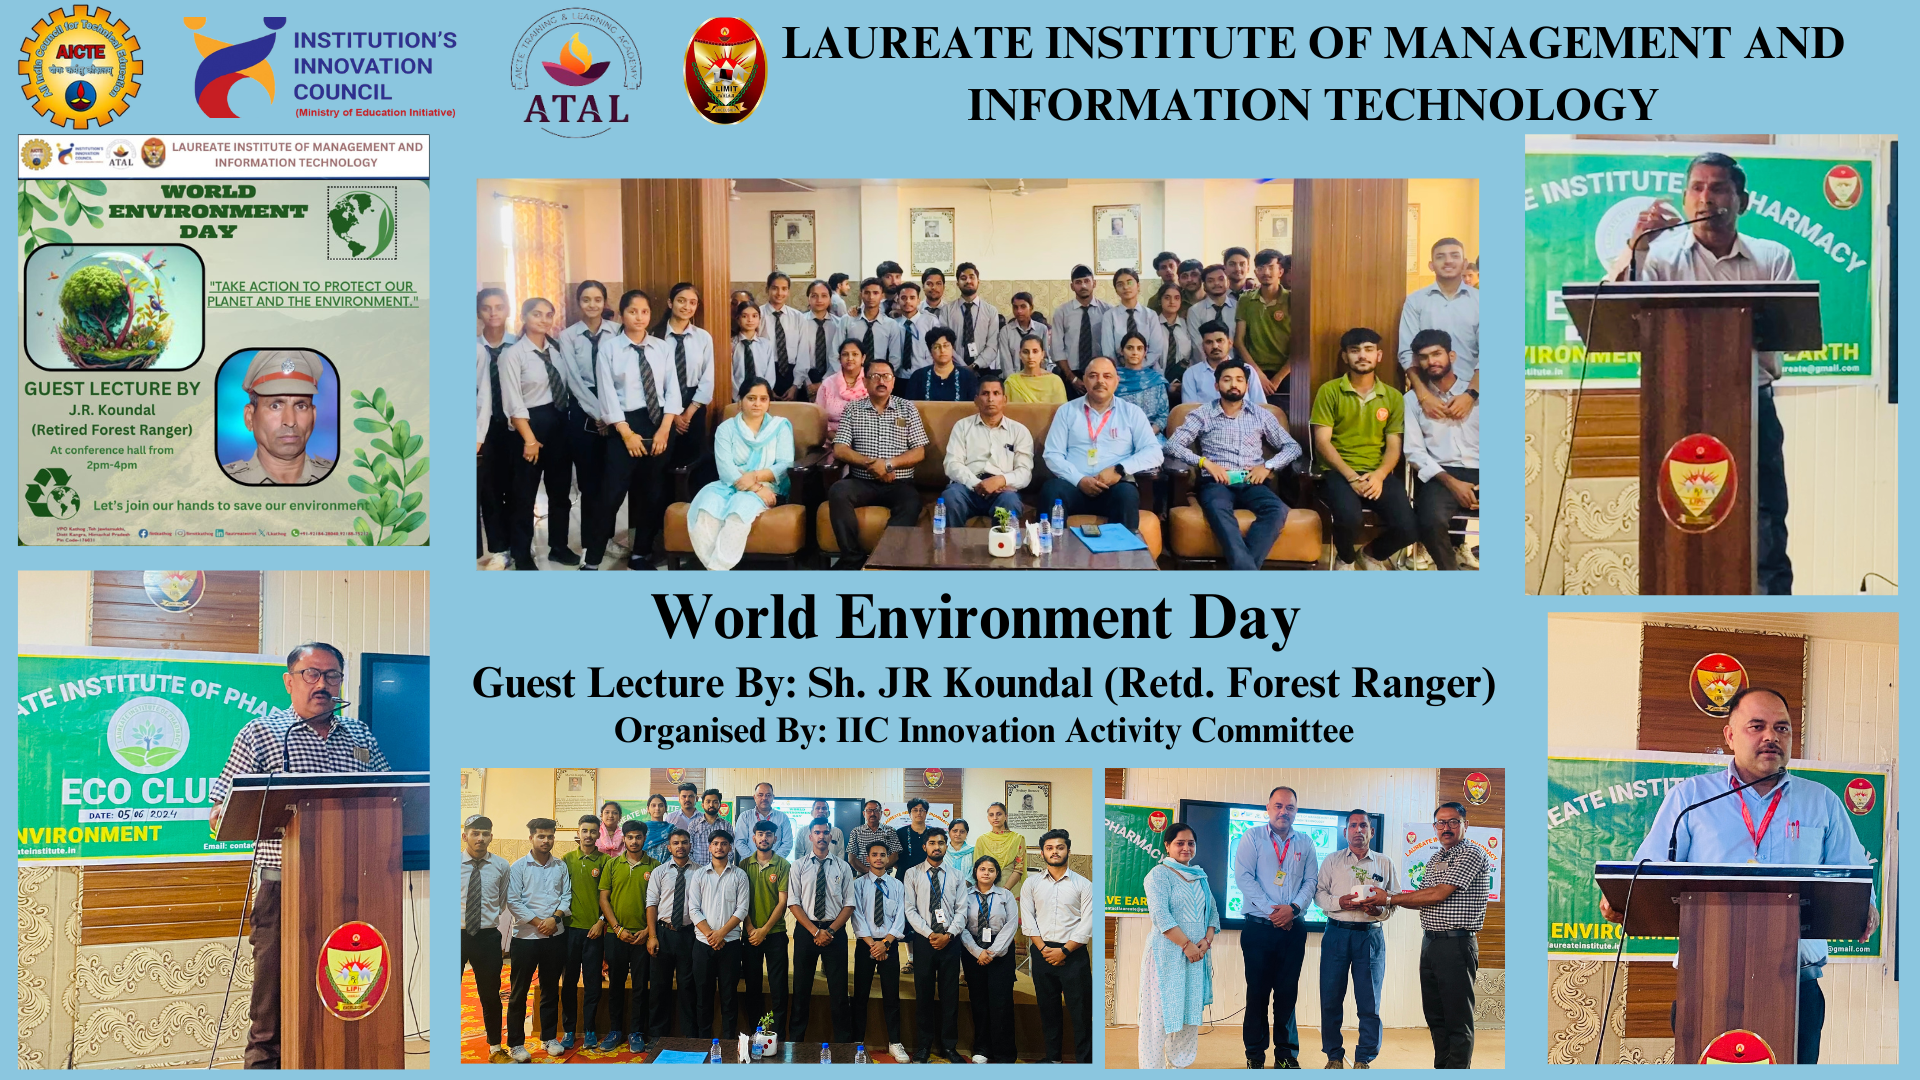 World Environment Day Guest Lecture By Sh. JR Koundal Organised By IIC Innovation Activity Commiitee (1)